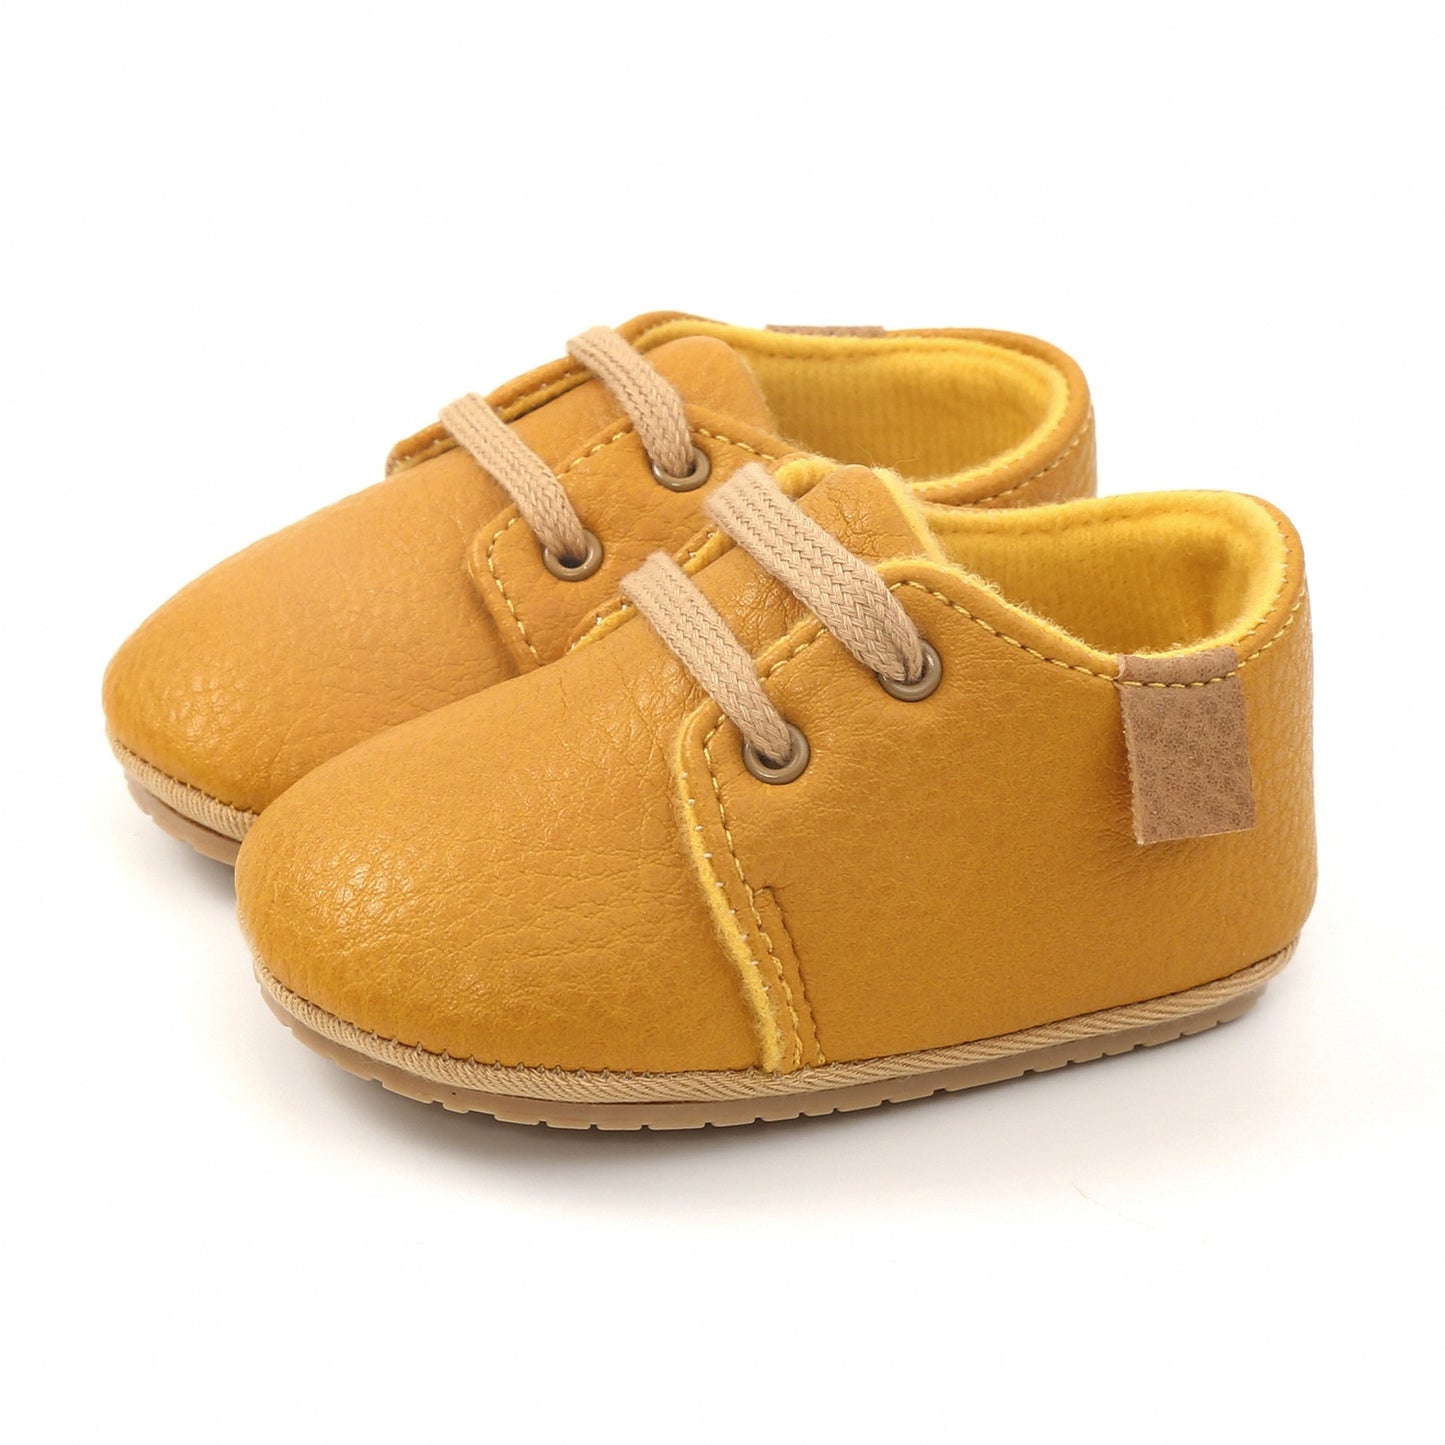 Baby Retro Leather Rubber Sole Anti-slip Moccasins - Forever Growth 